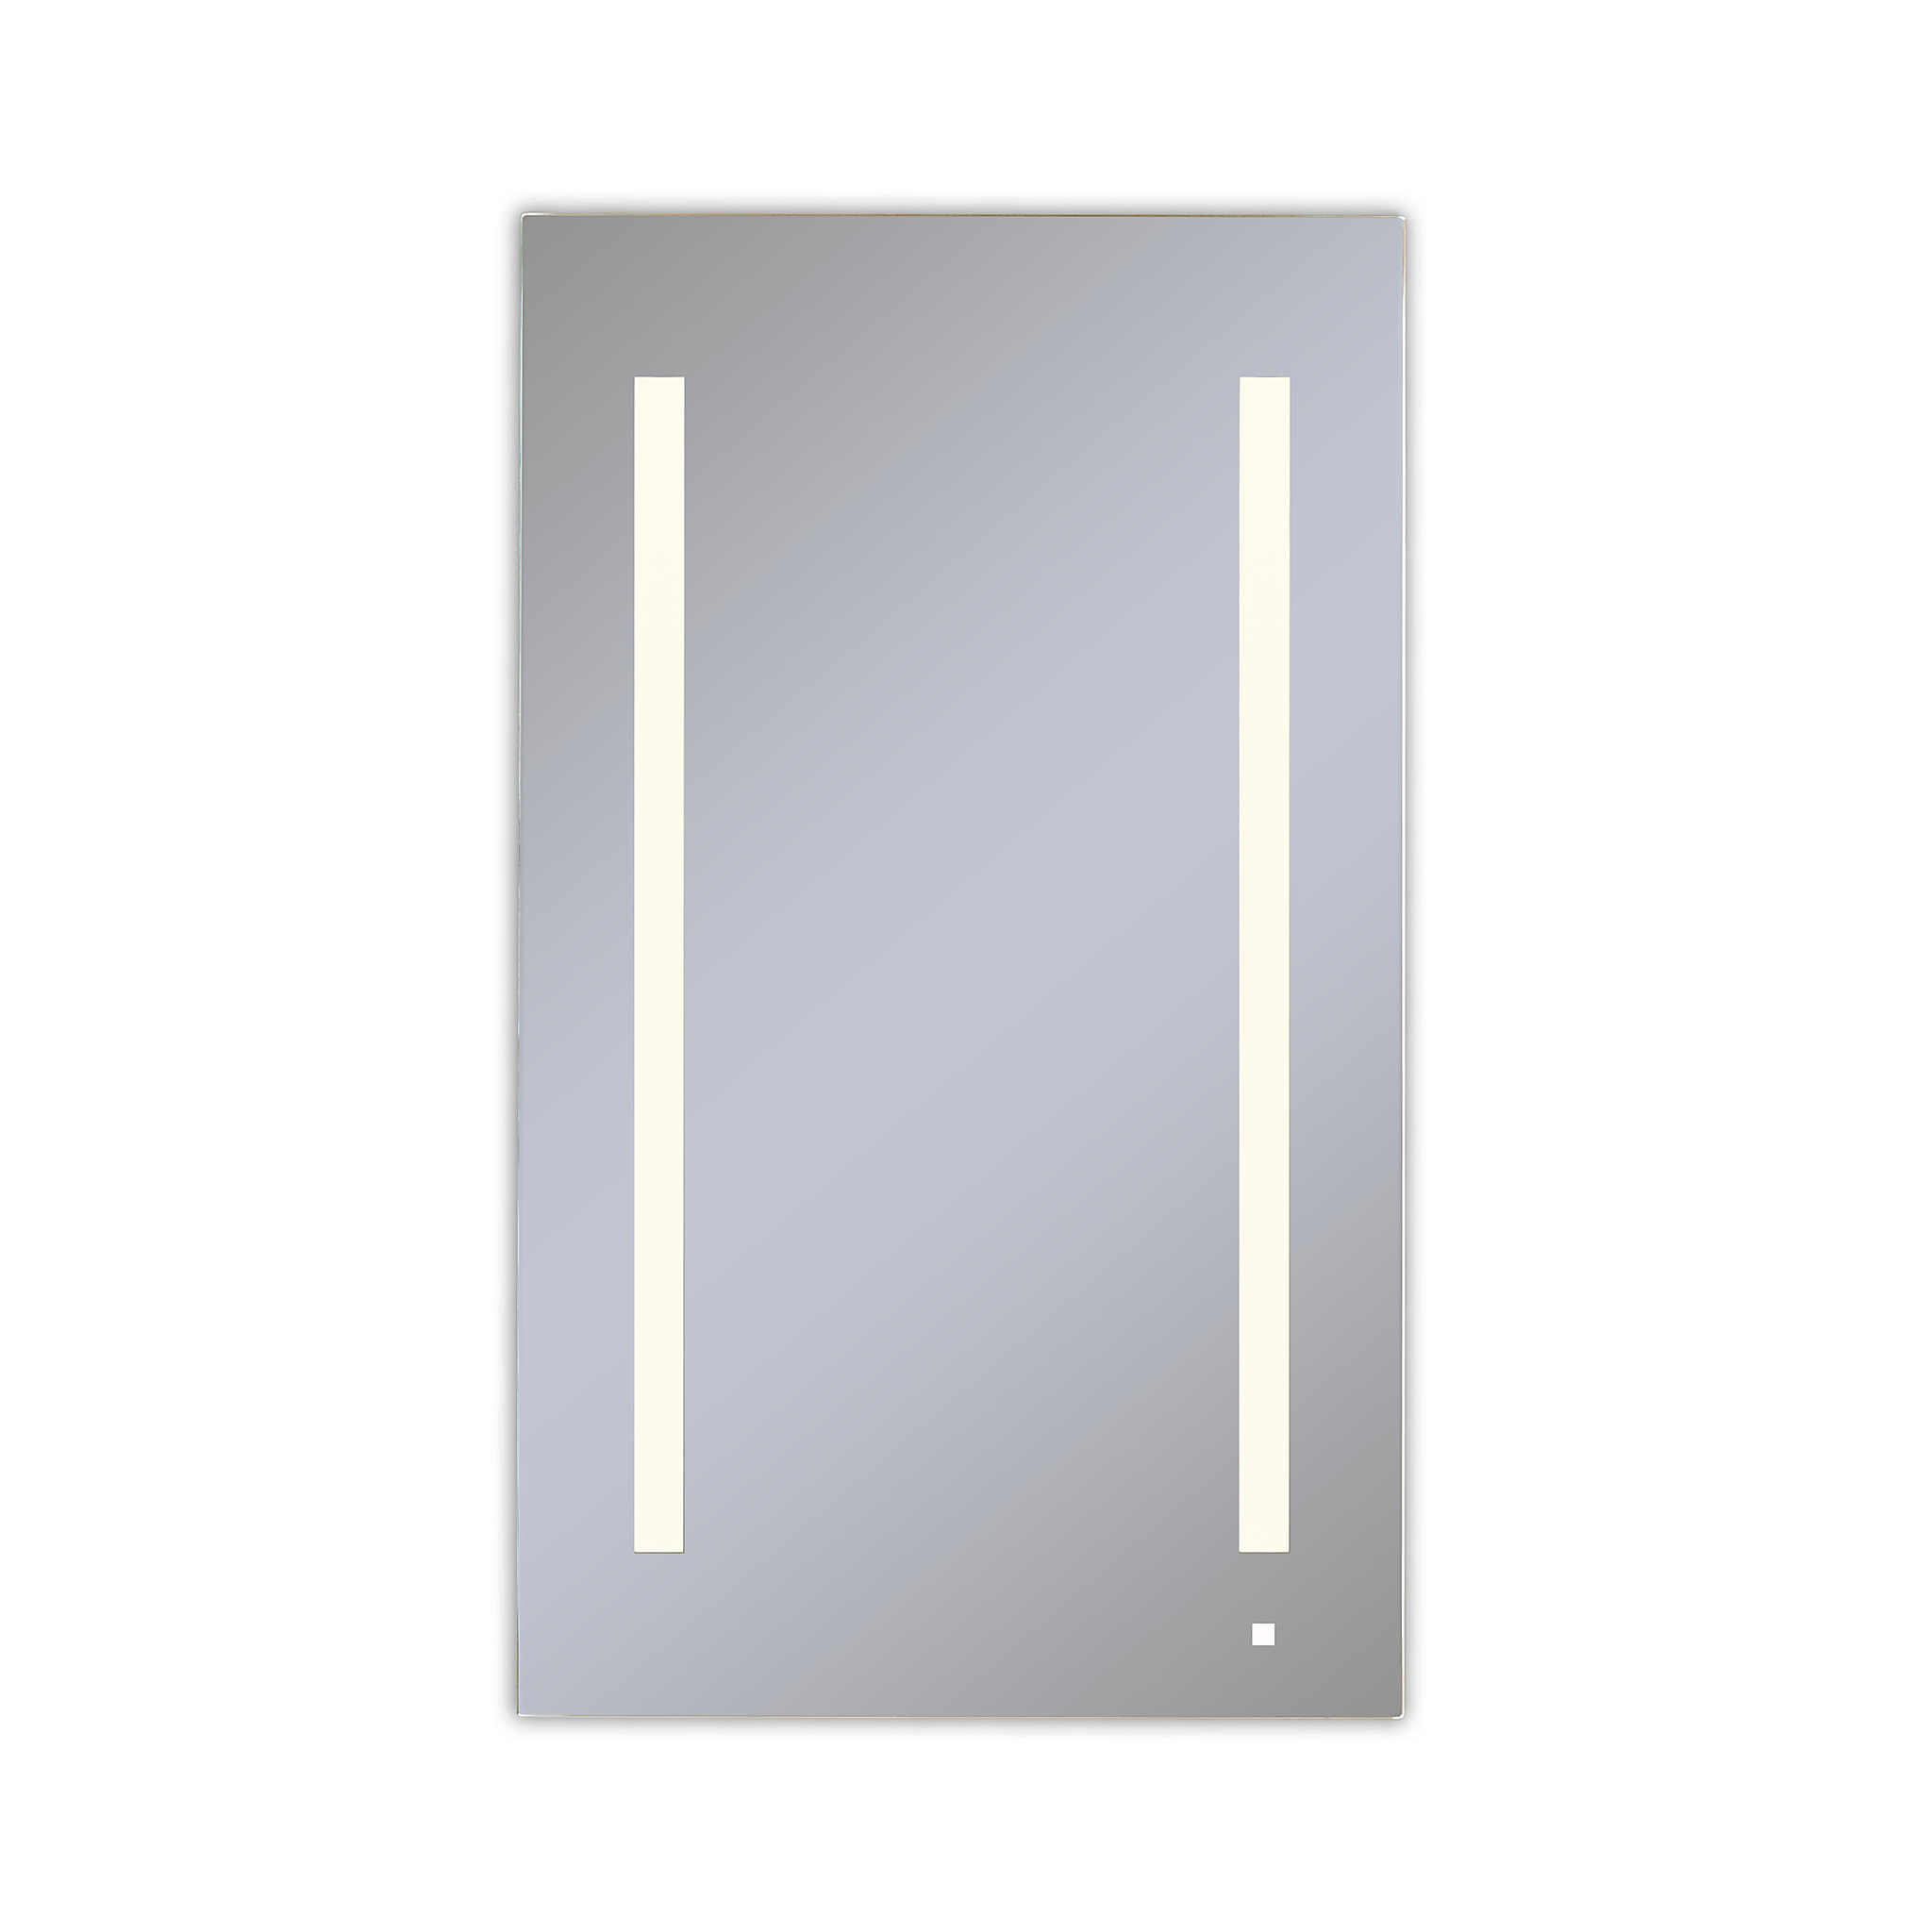 Robern AC2440D4P1LW AiO Lighted Cabinet, 24" x 40" x 4", LUM Lighting, 2700K Temperature (Warm Light), Dimmable, Electrical Outl